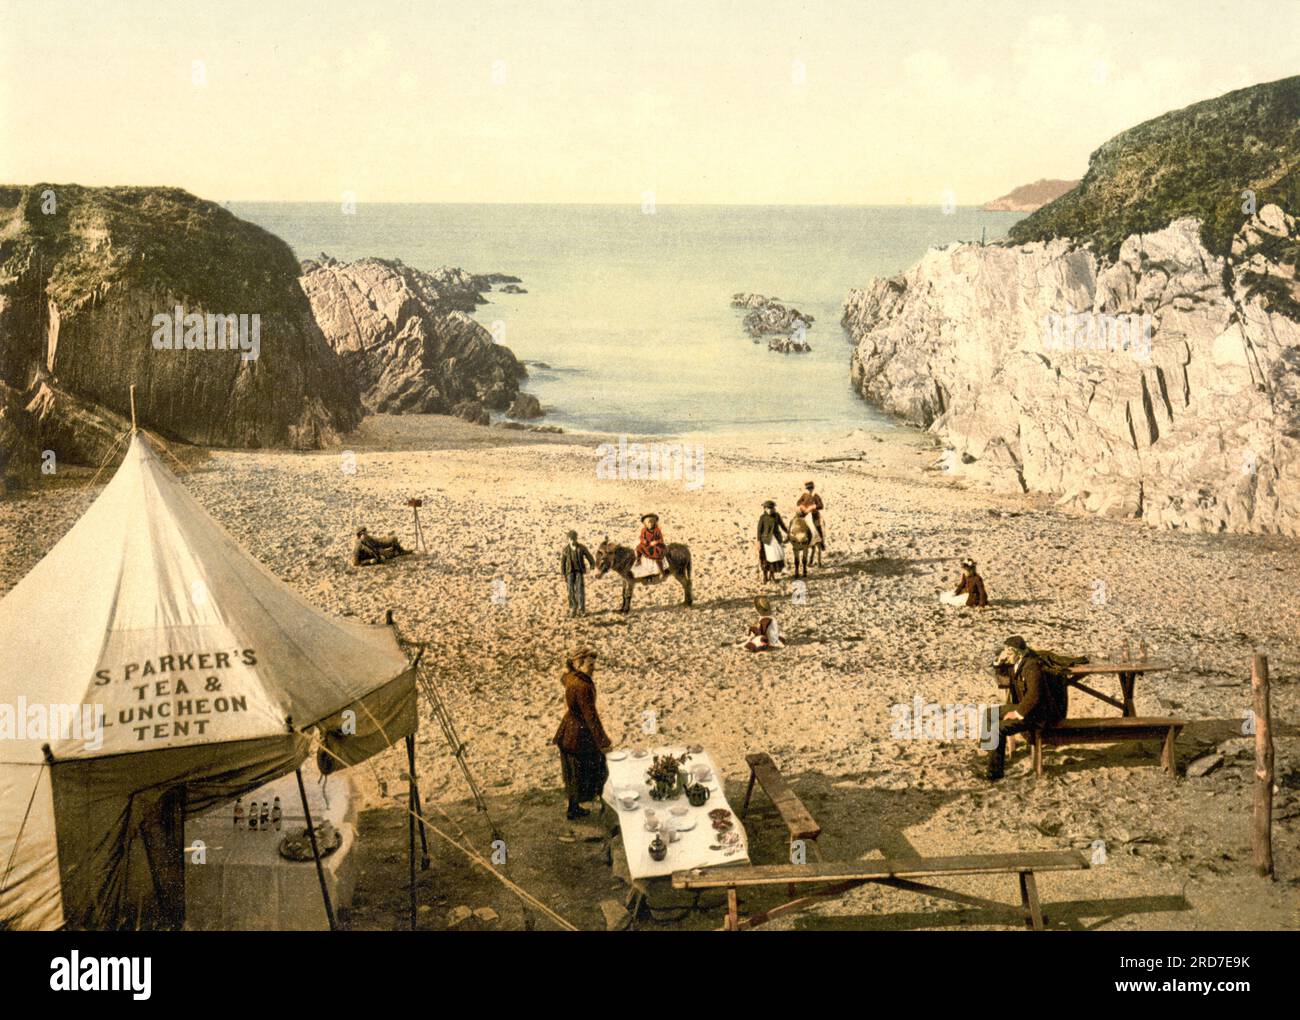 Barricane Shell Beach, Mortehoe, village and former manor on the north coast of Devon, England, 1895, Historical, digital improved reproduction of an old Photochrome print Stock Photo